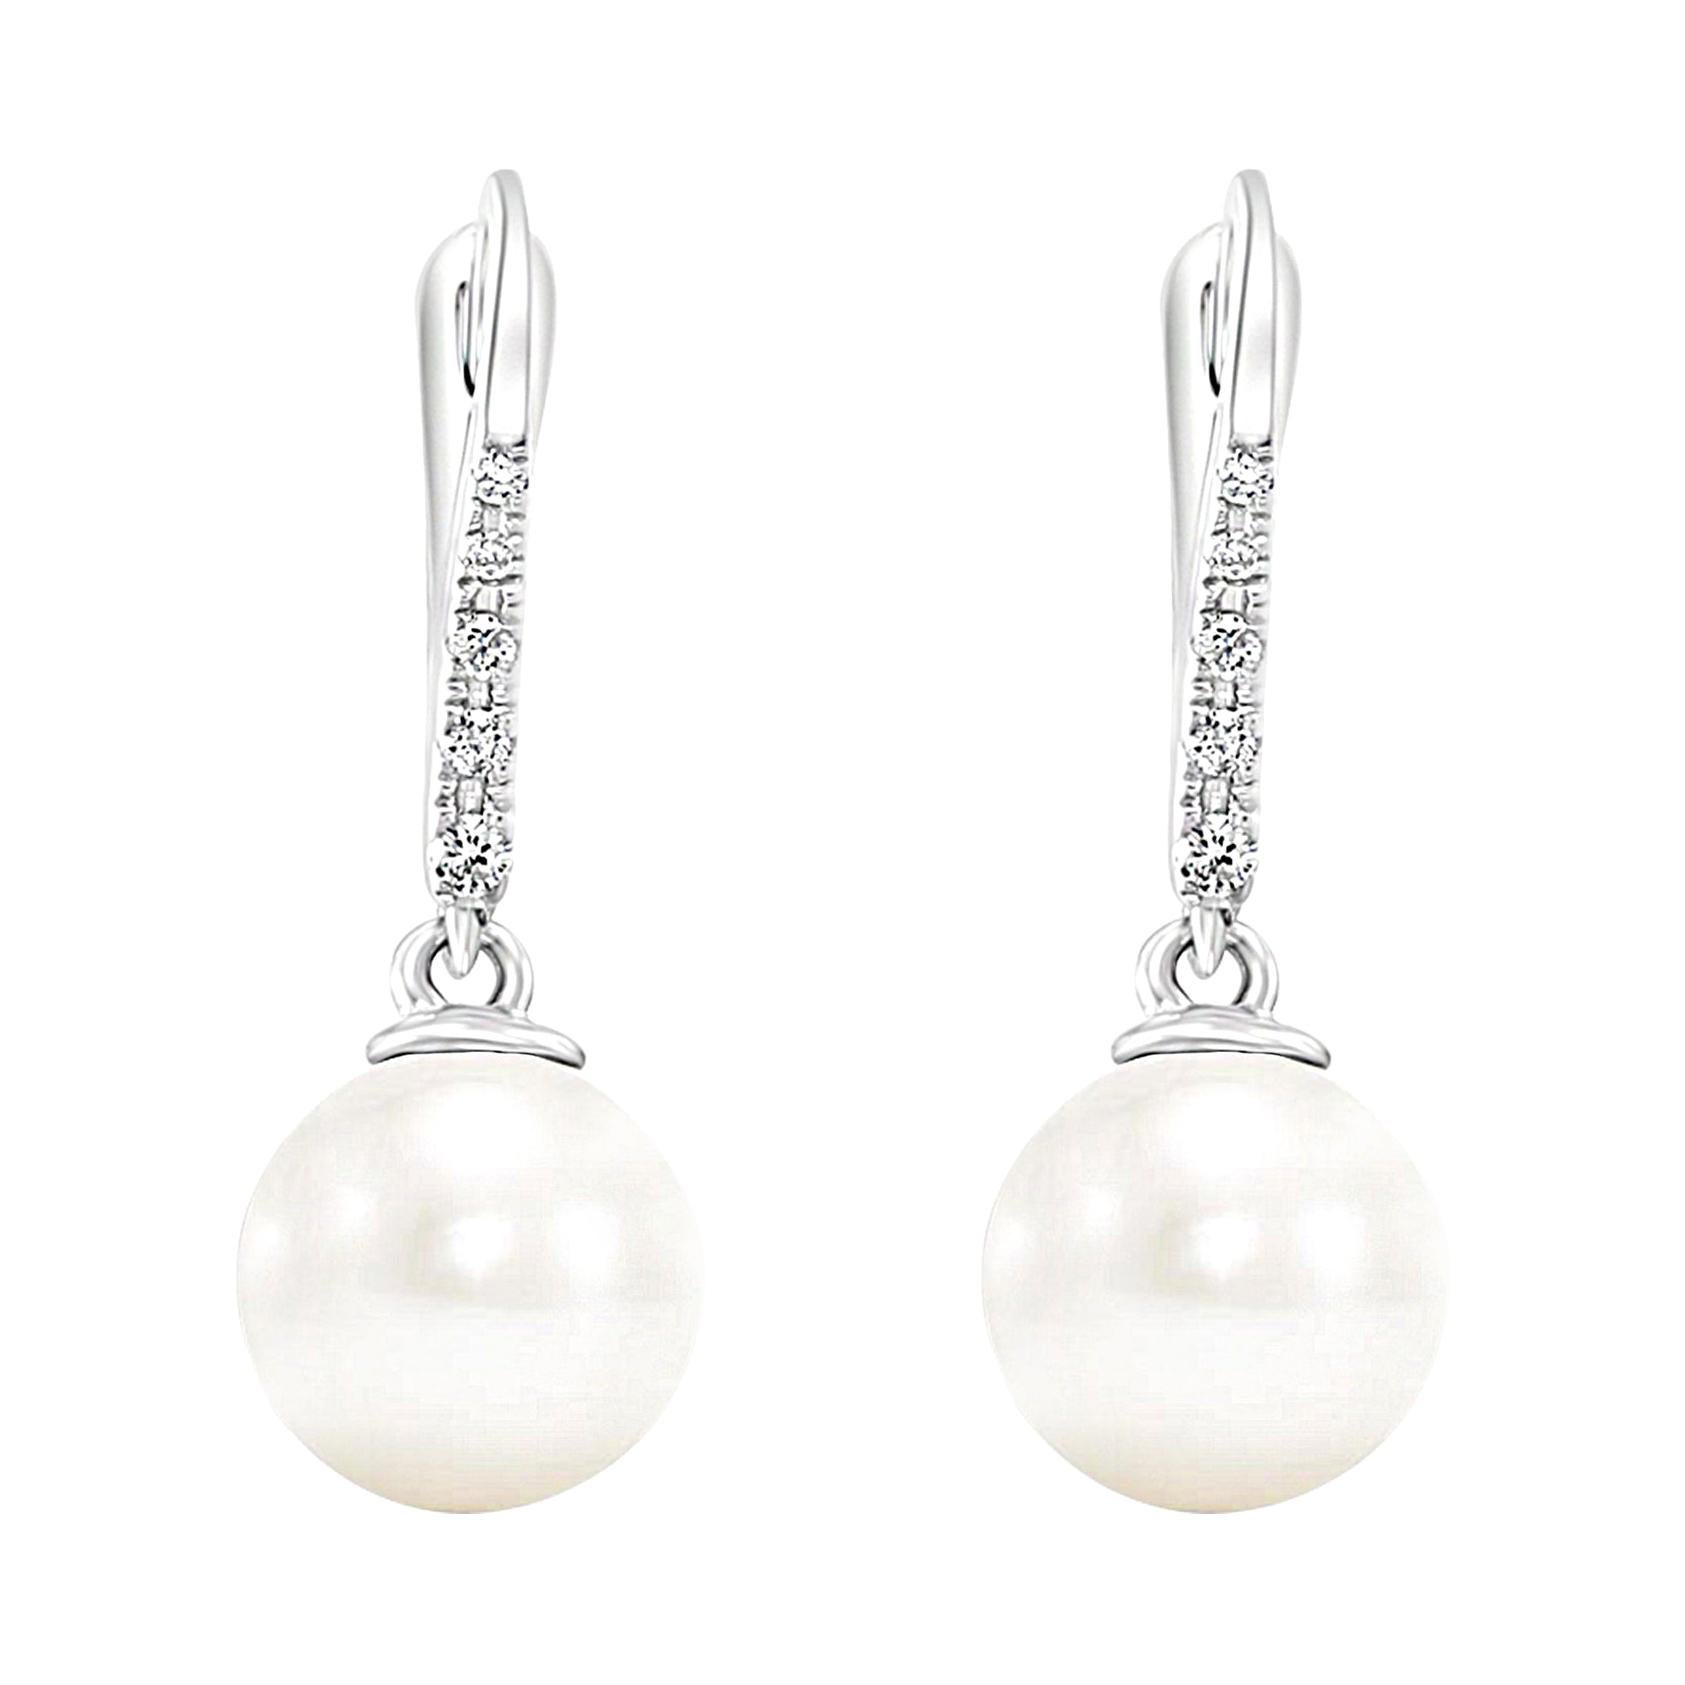 14 Karat White Gold and Diamond Lever-Back Earrings with Freshwater Pearls